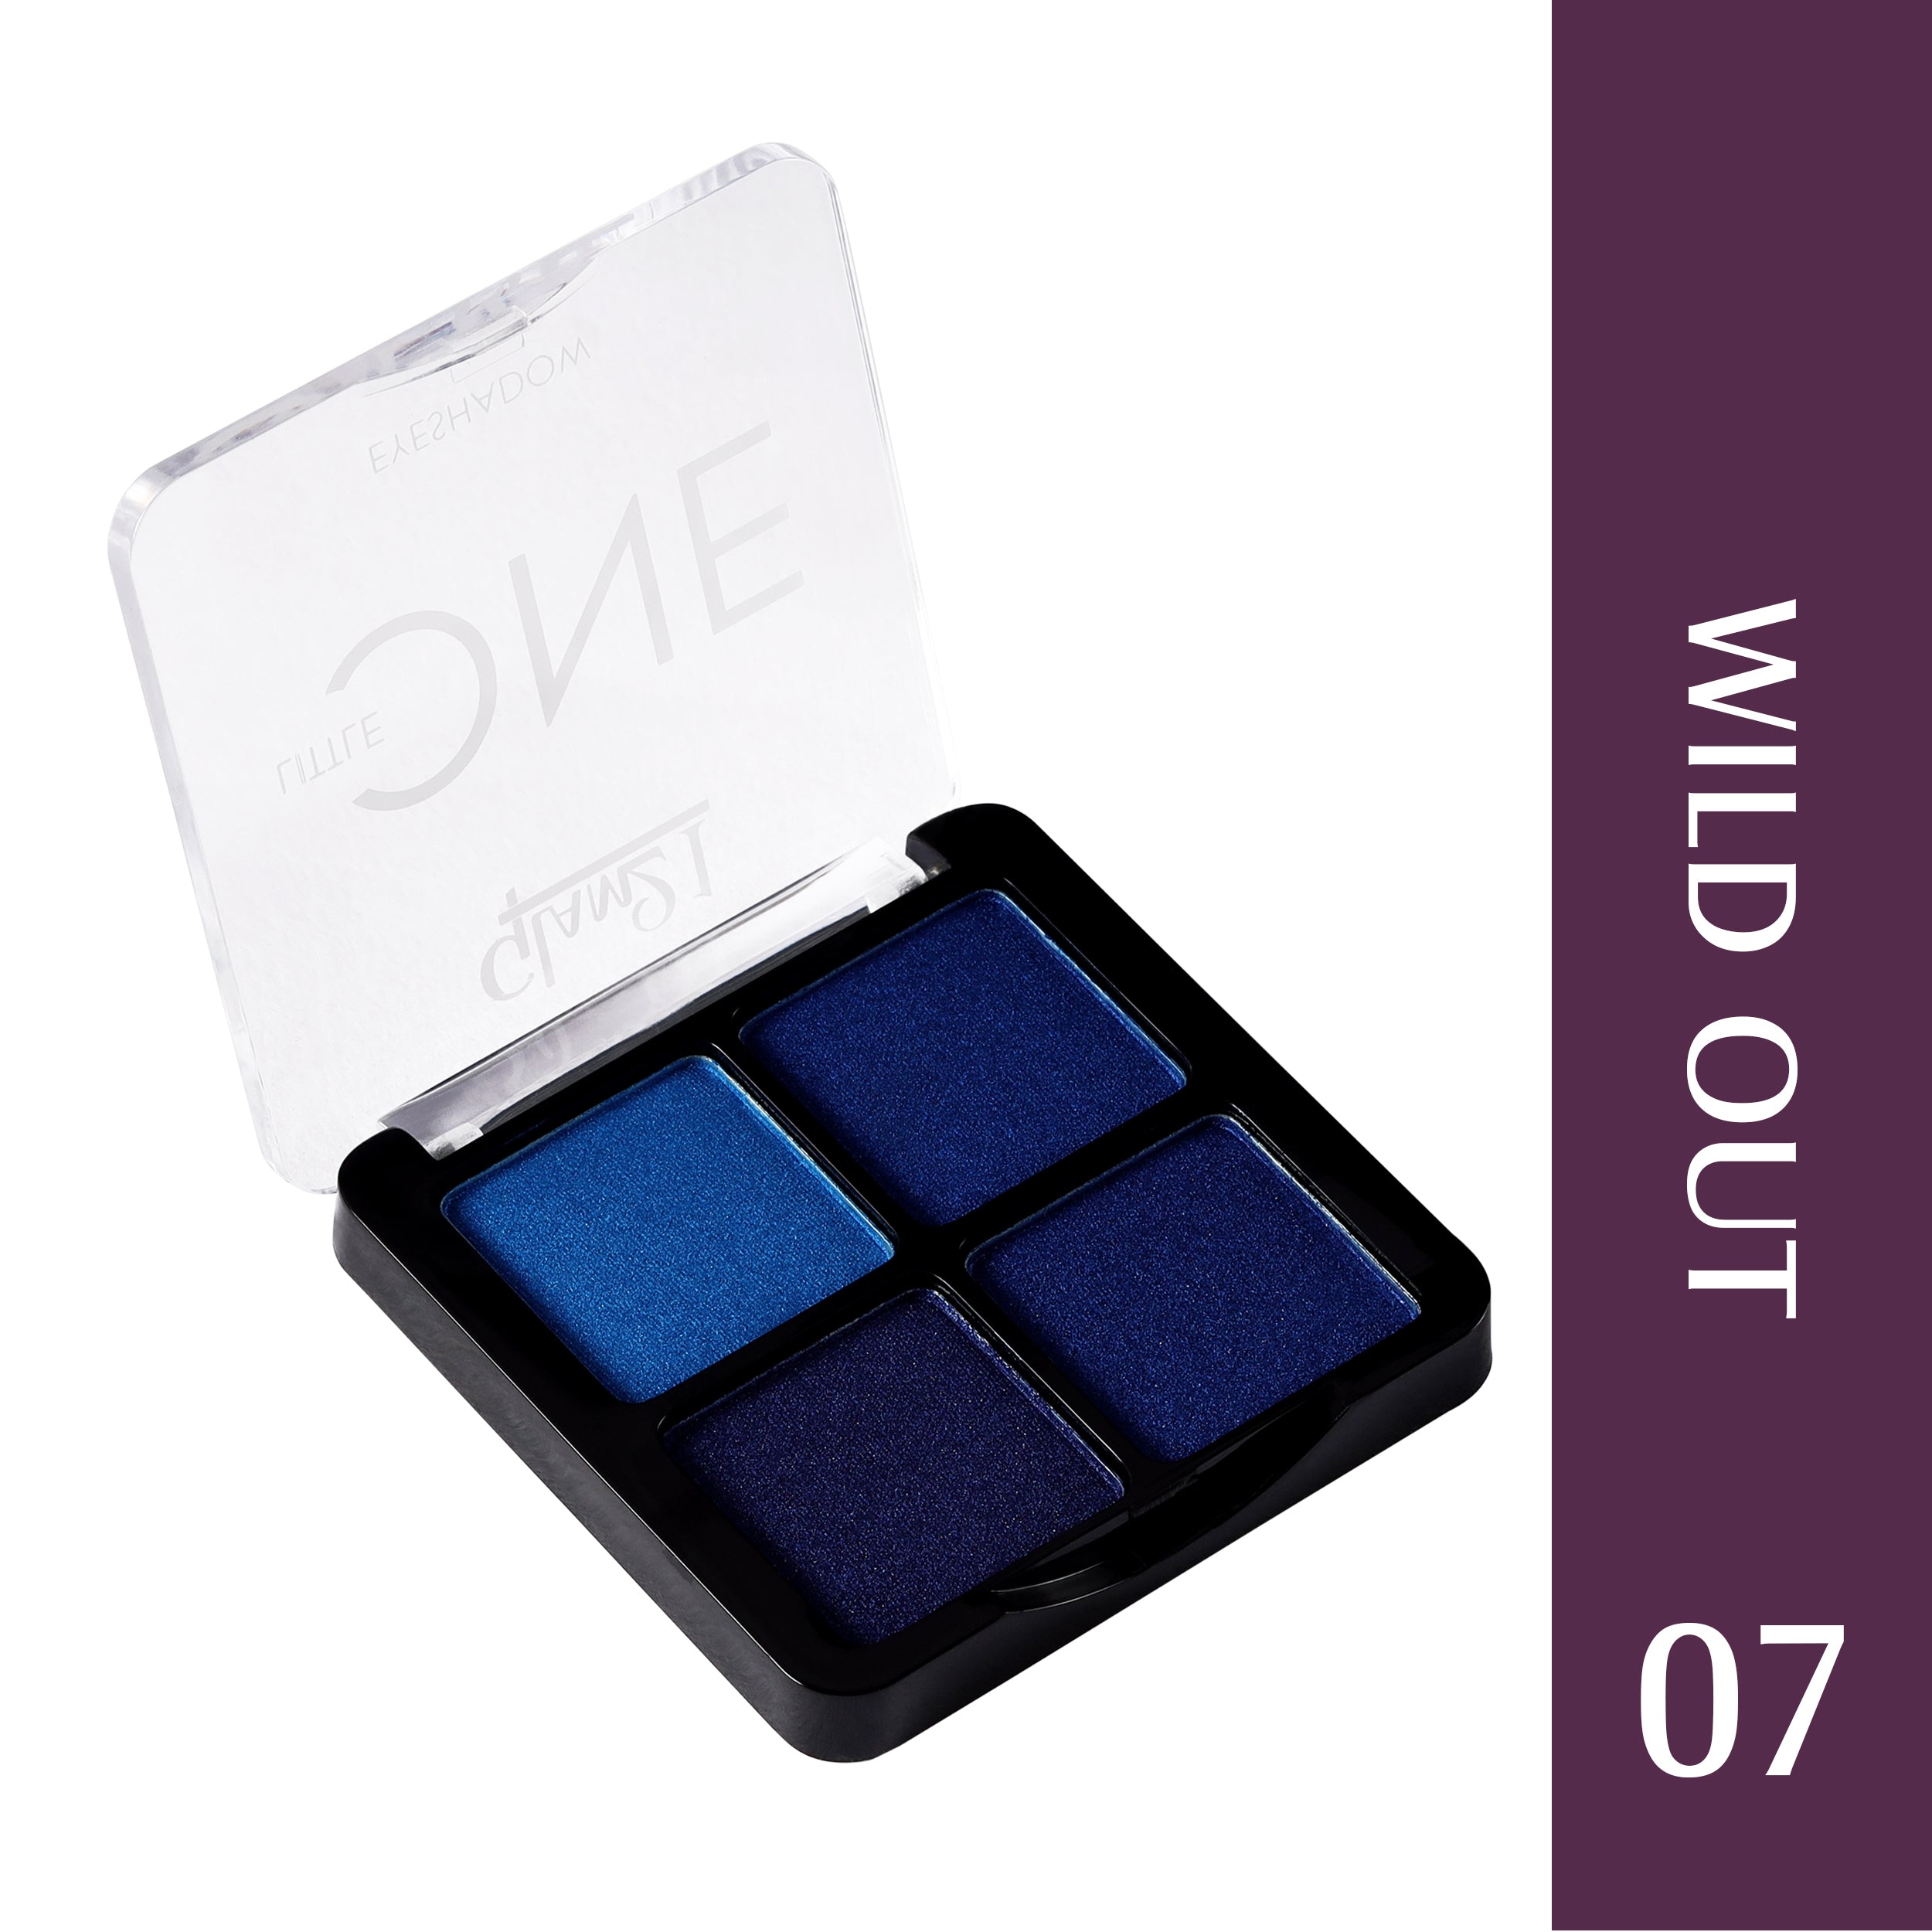 Glam21 Little One Eyeshadow Palette Ultra Pigmented Longlasting Eye Make Up,Pocket Size 3.5 g (WILD OUT)